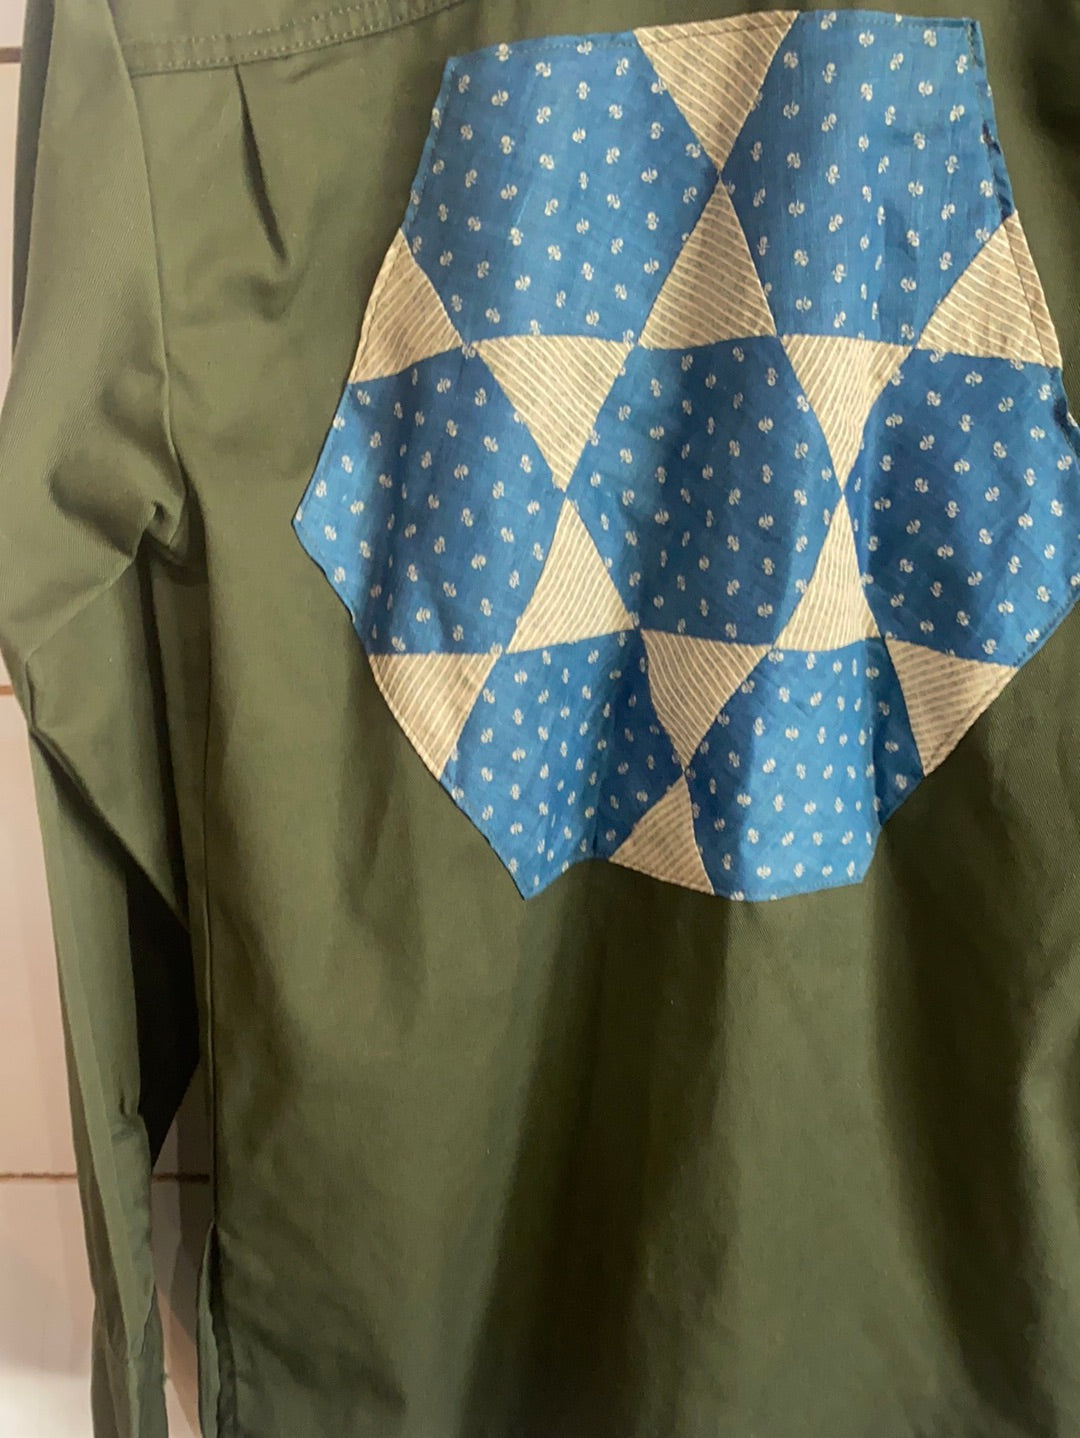 Quilt Patch - Vintage Military Shirt